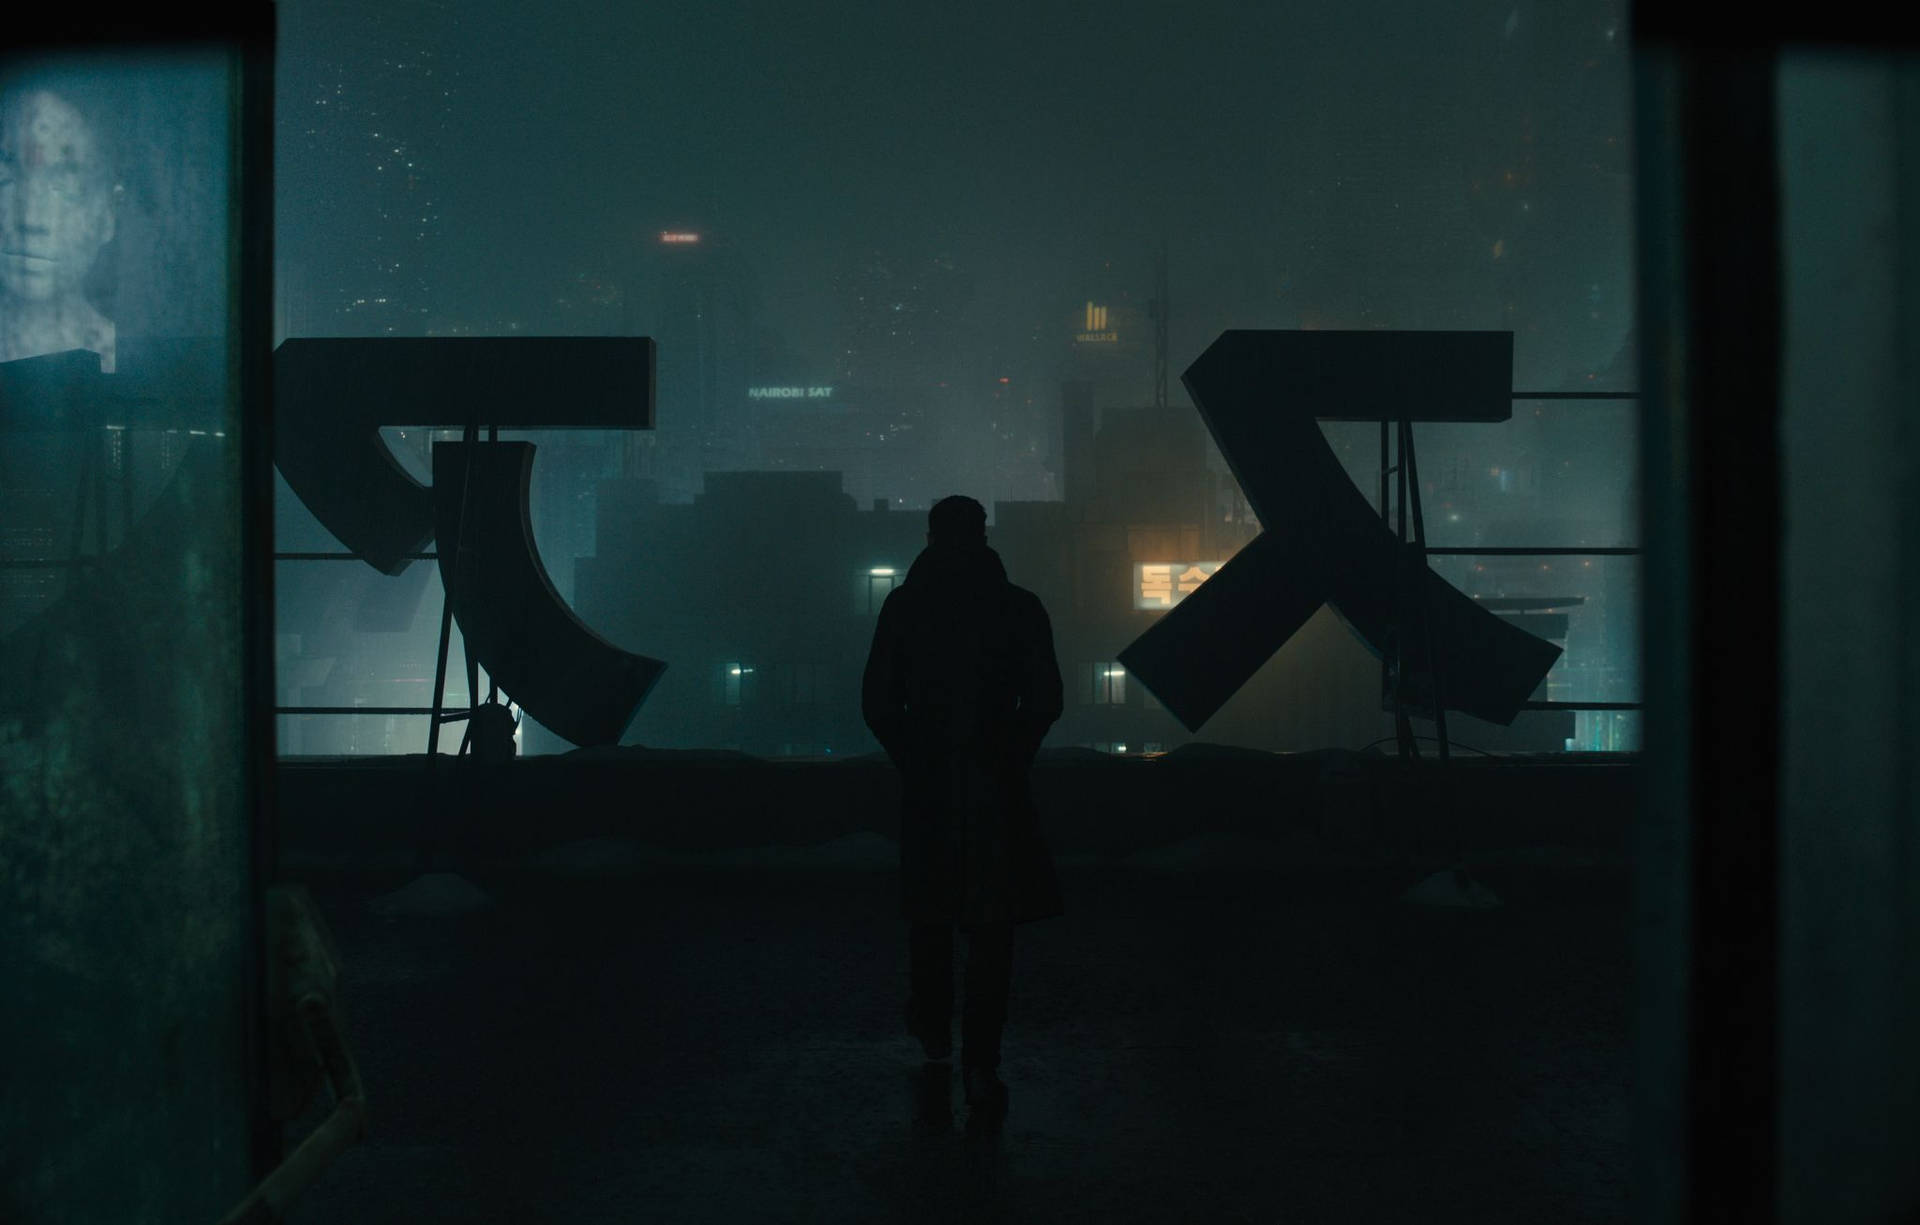 K searches the rooftop nightscape of Blade Runner 2049 Wallpaper